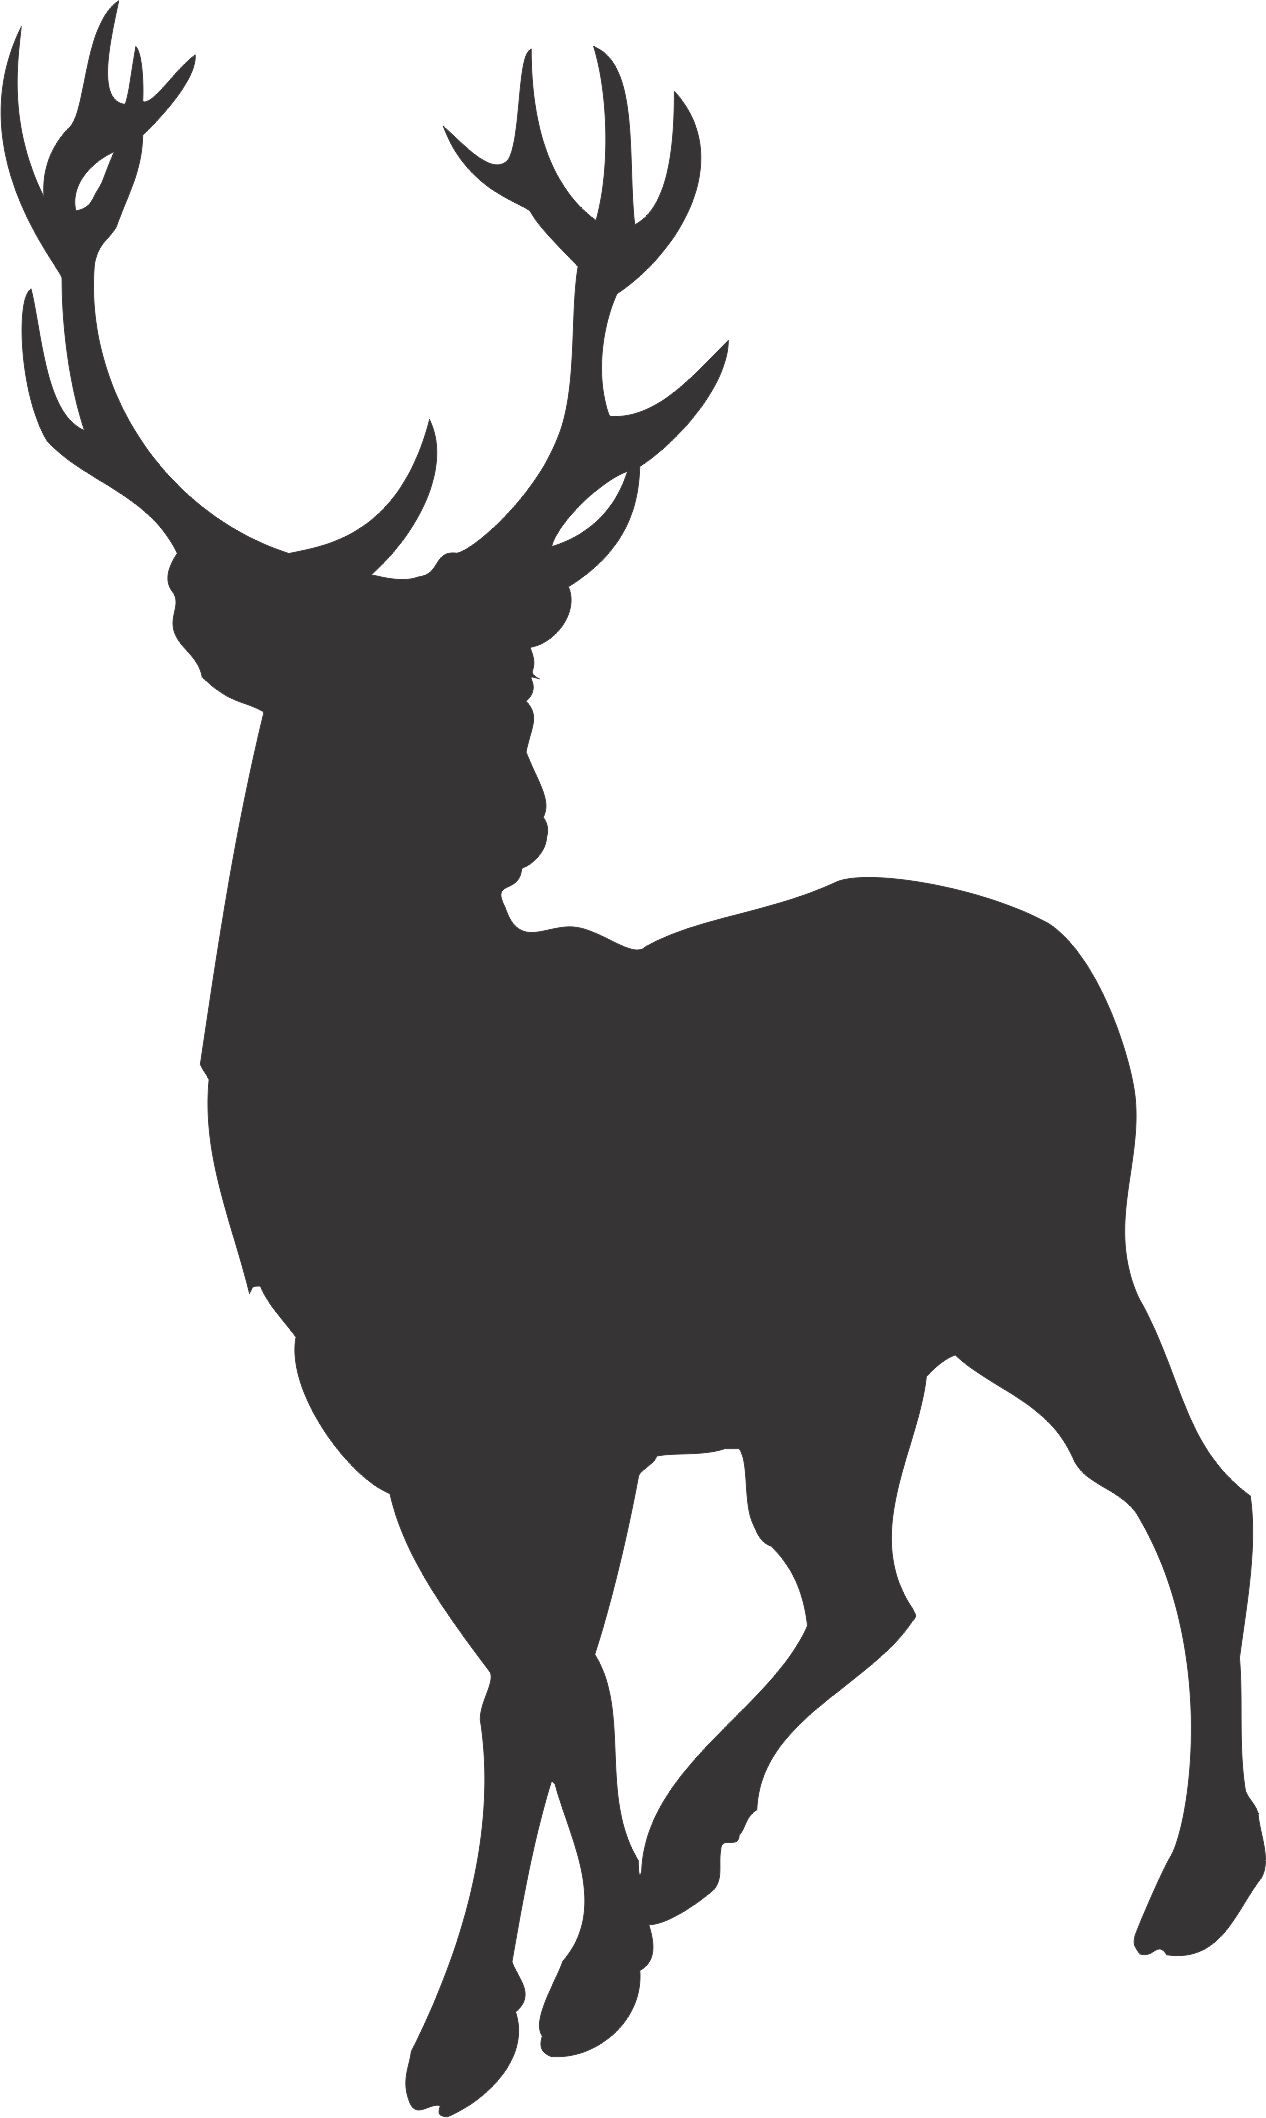 19 Stag Head Silhouette Vector Free Cliparts That You Can Download To